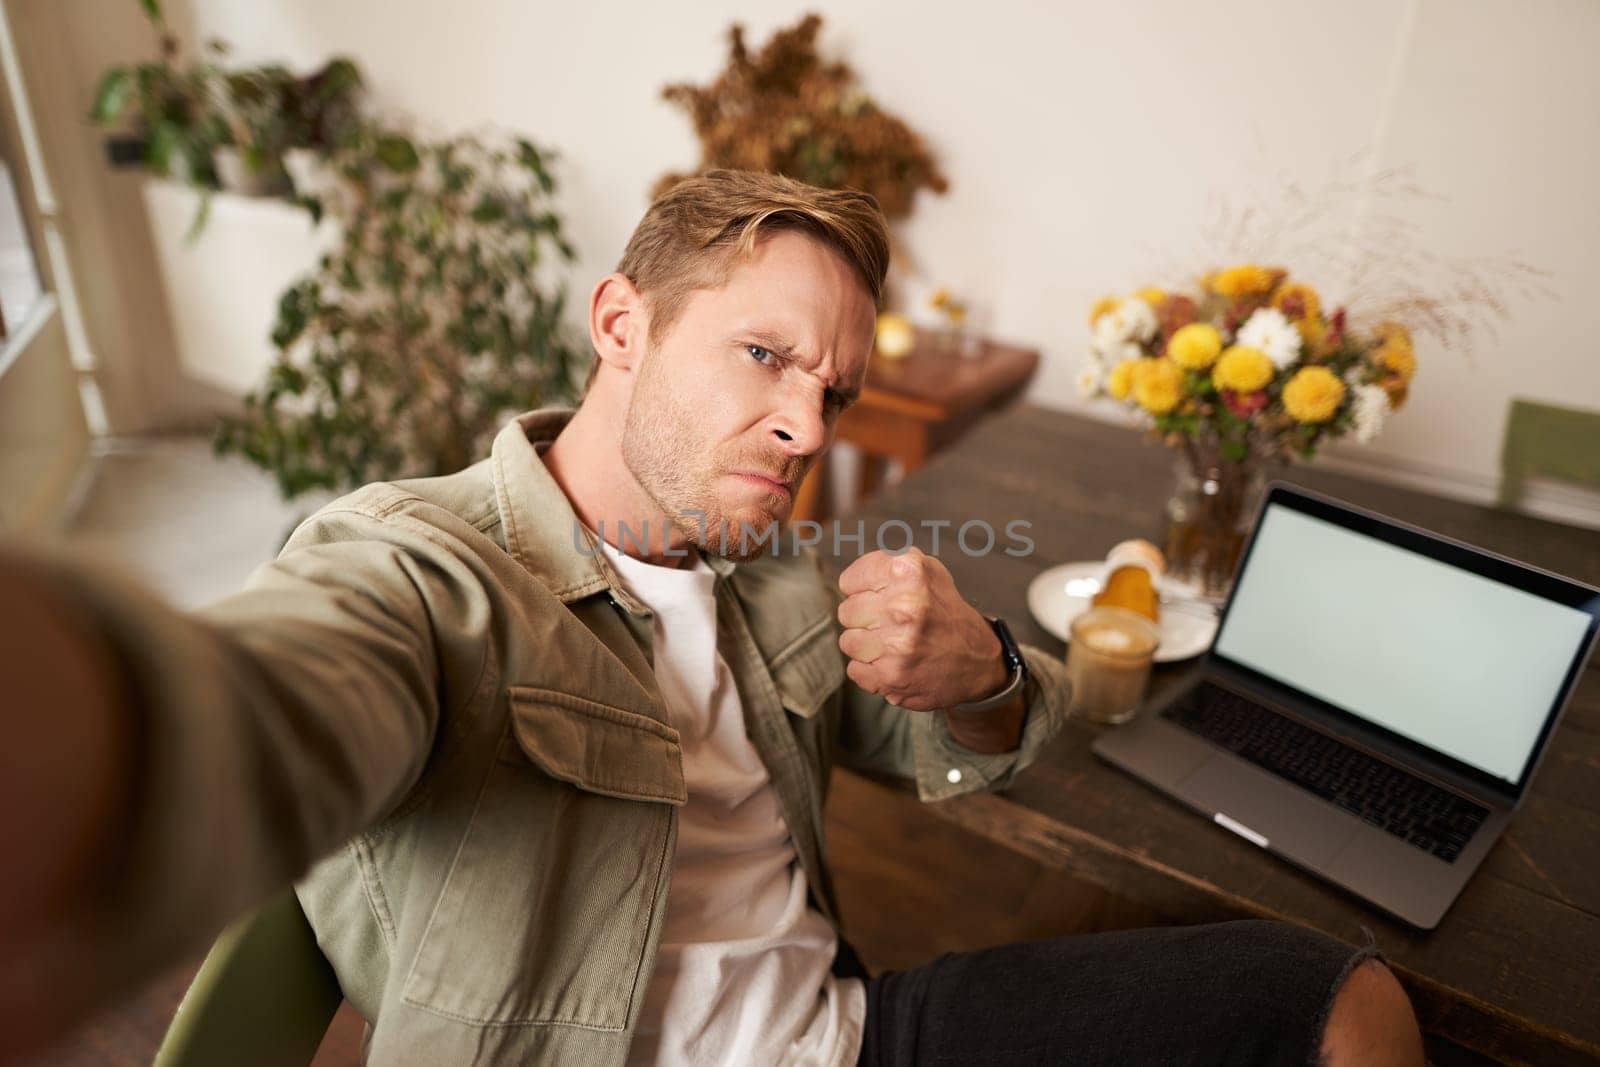 Portrait of handsome man making angry threatening face for selfie photo, taking picture on smartphone app in cafe, sitting near laptop.